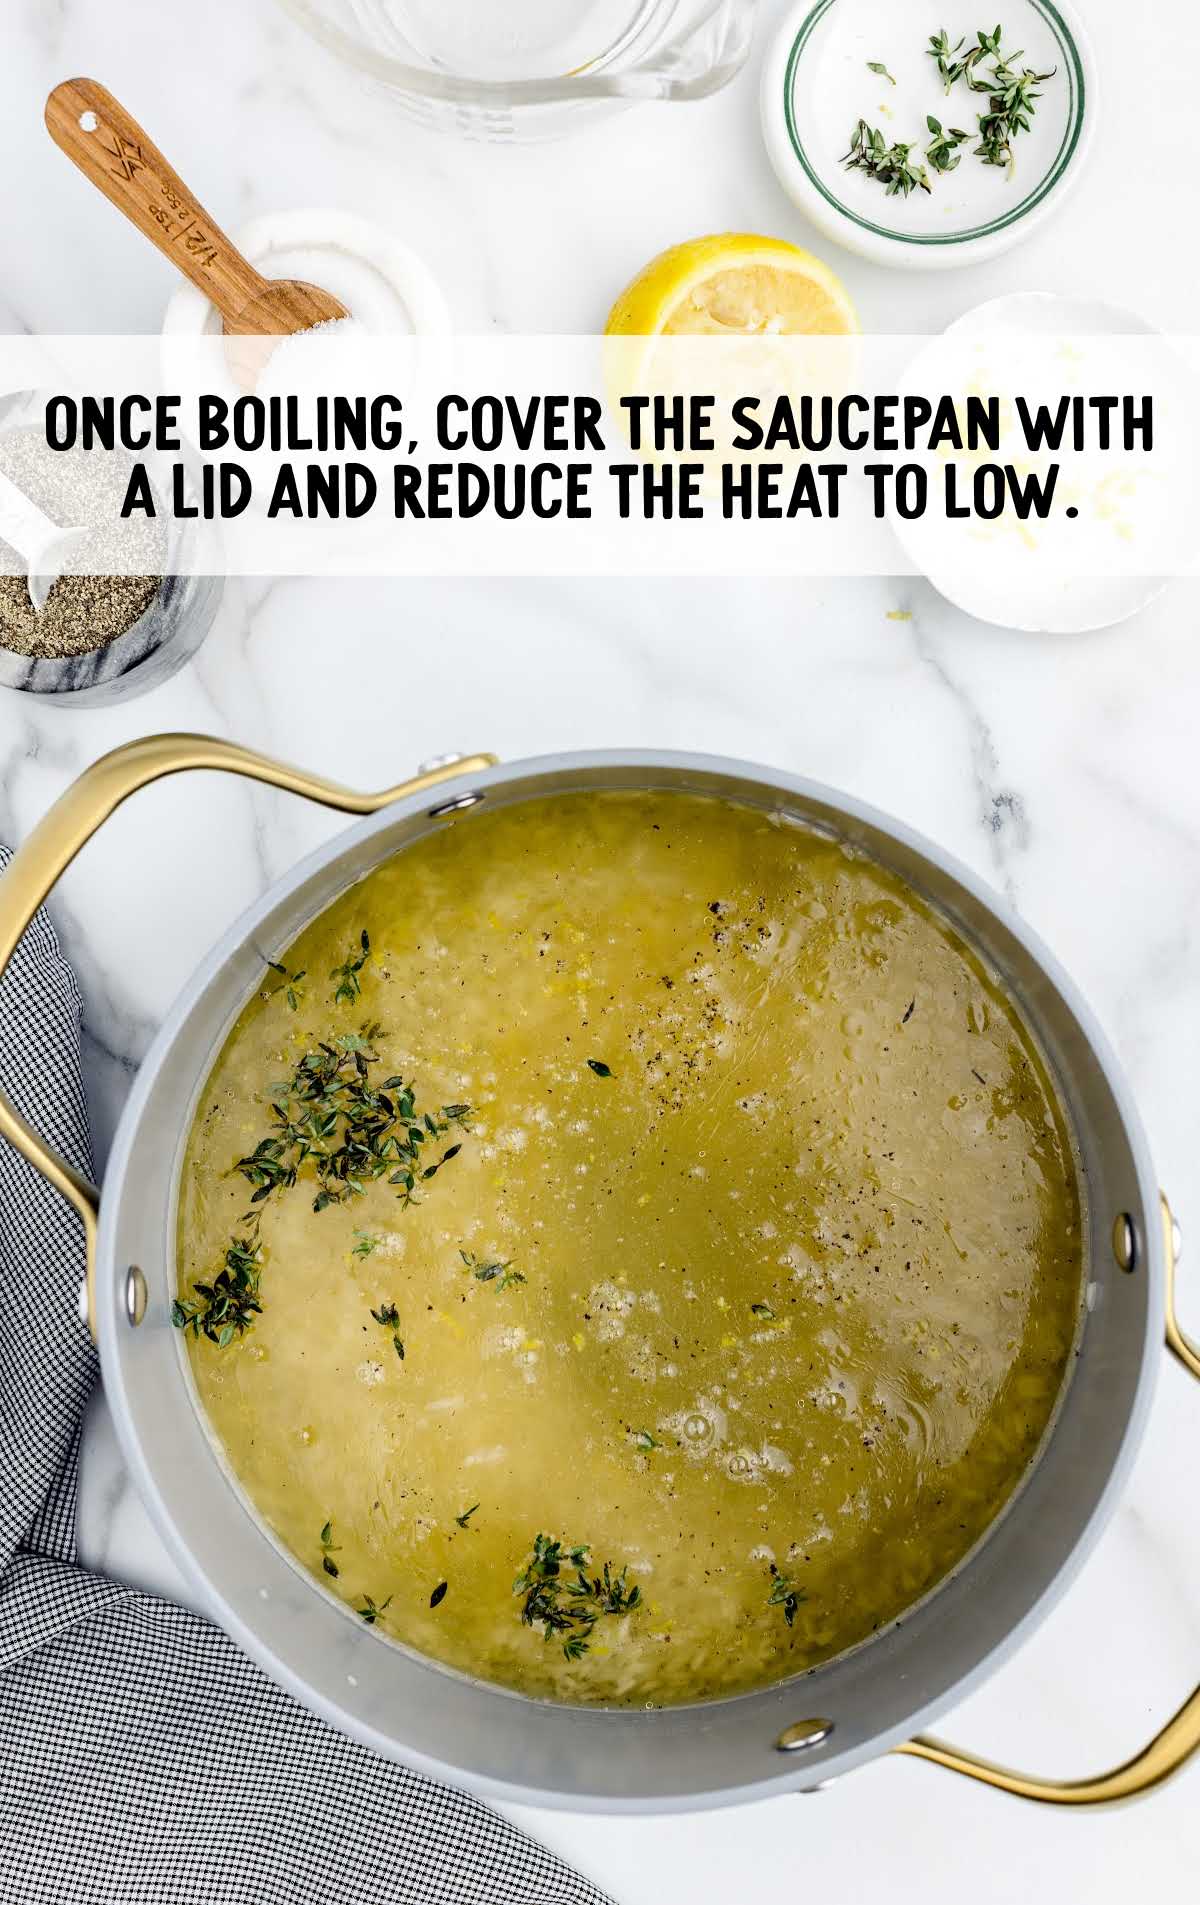 cover saucepan with lid and reduce heat